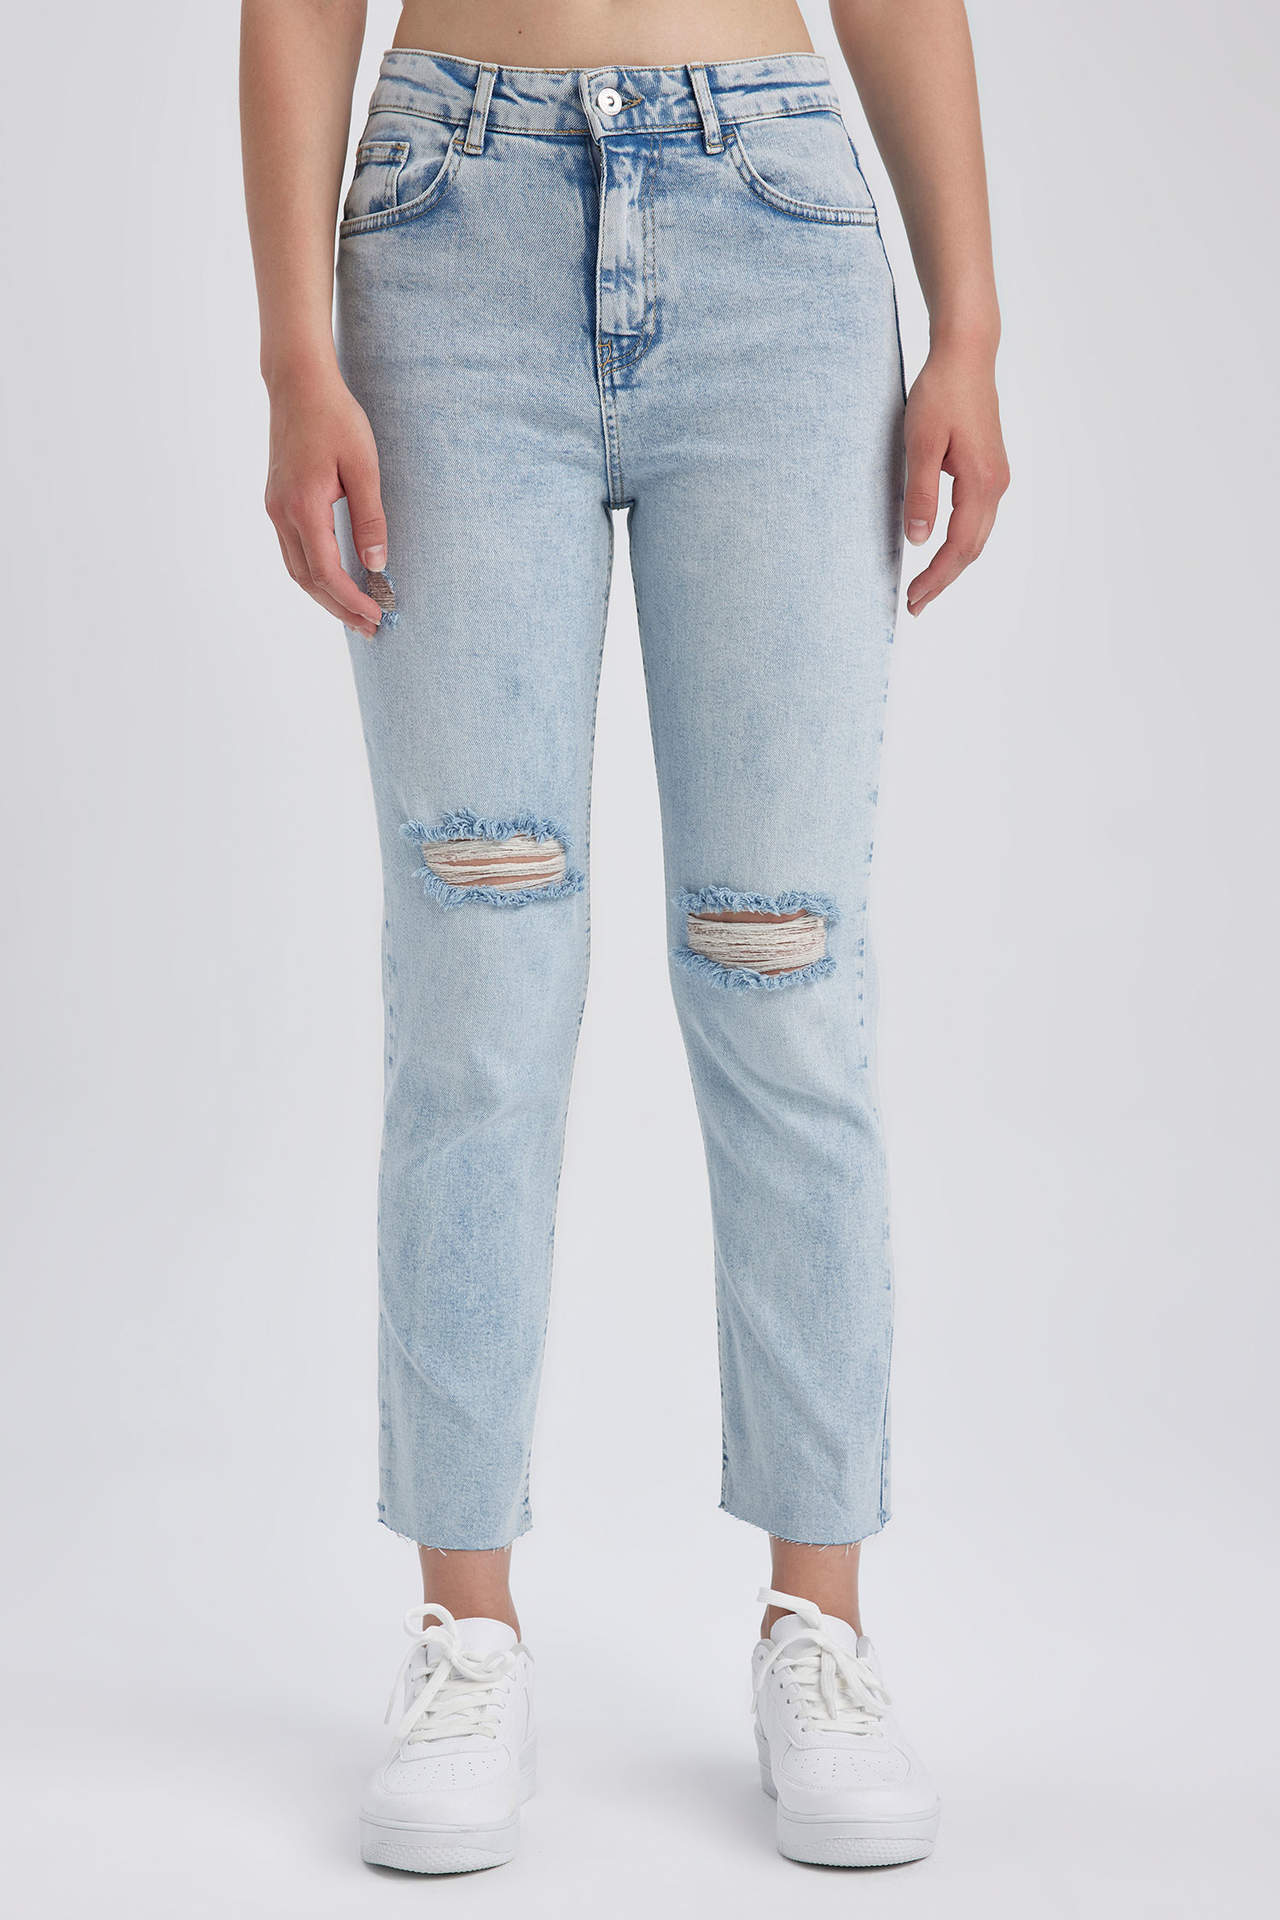 DEFACTO Ripped Detailed Cropped Edge Jeans Long Trousers